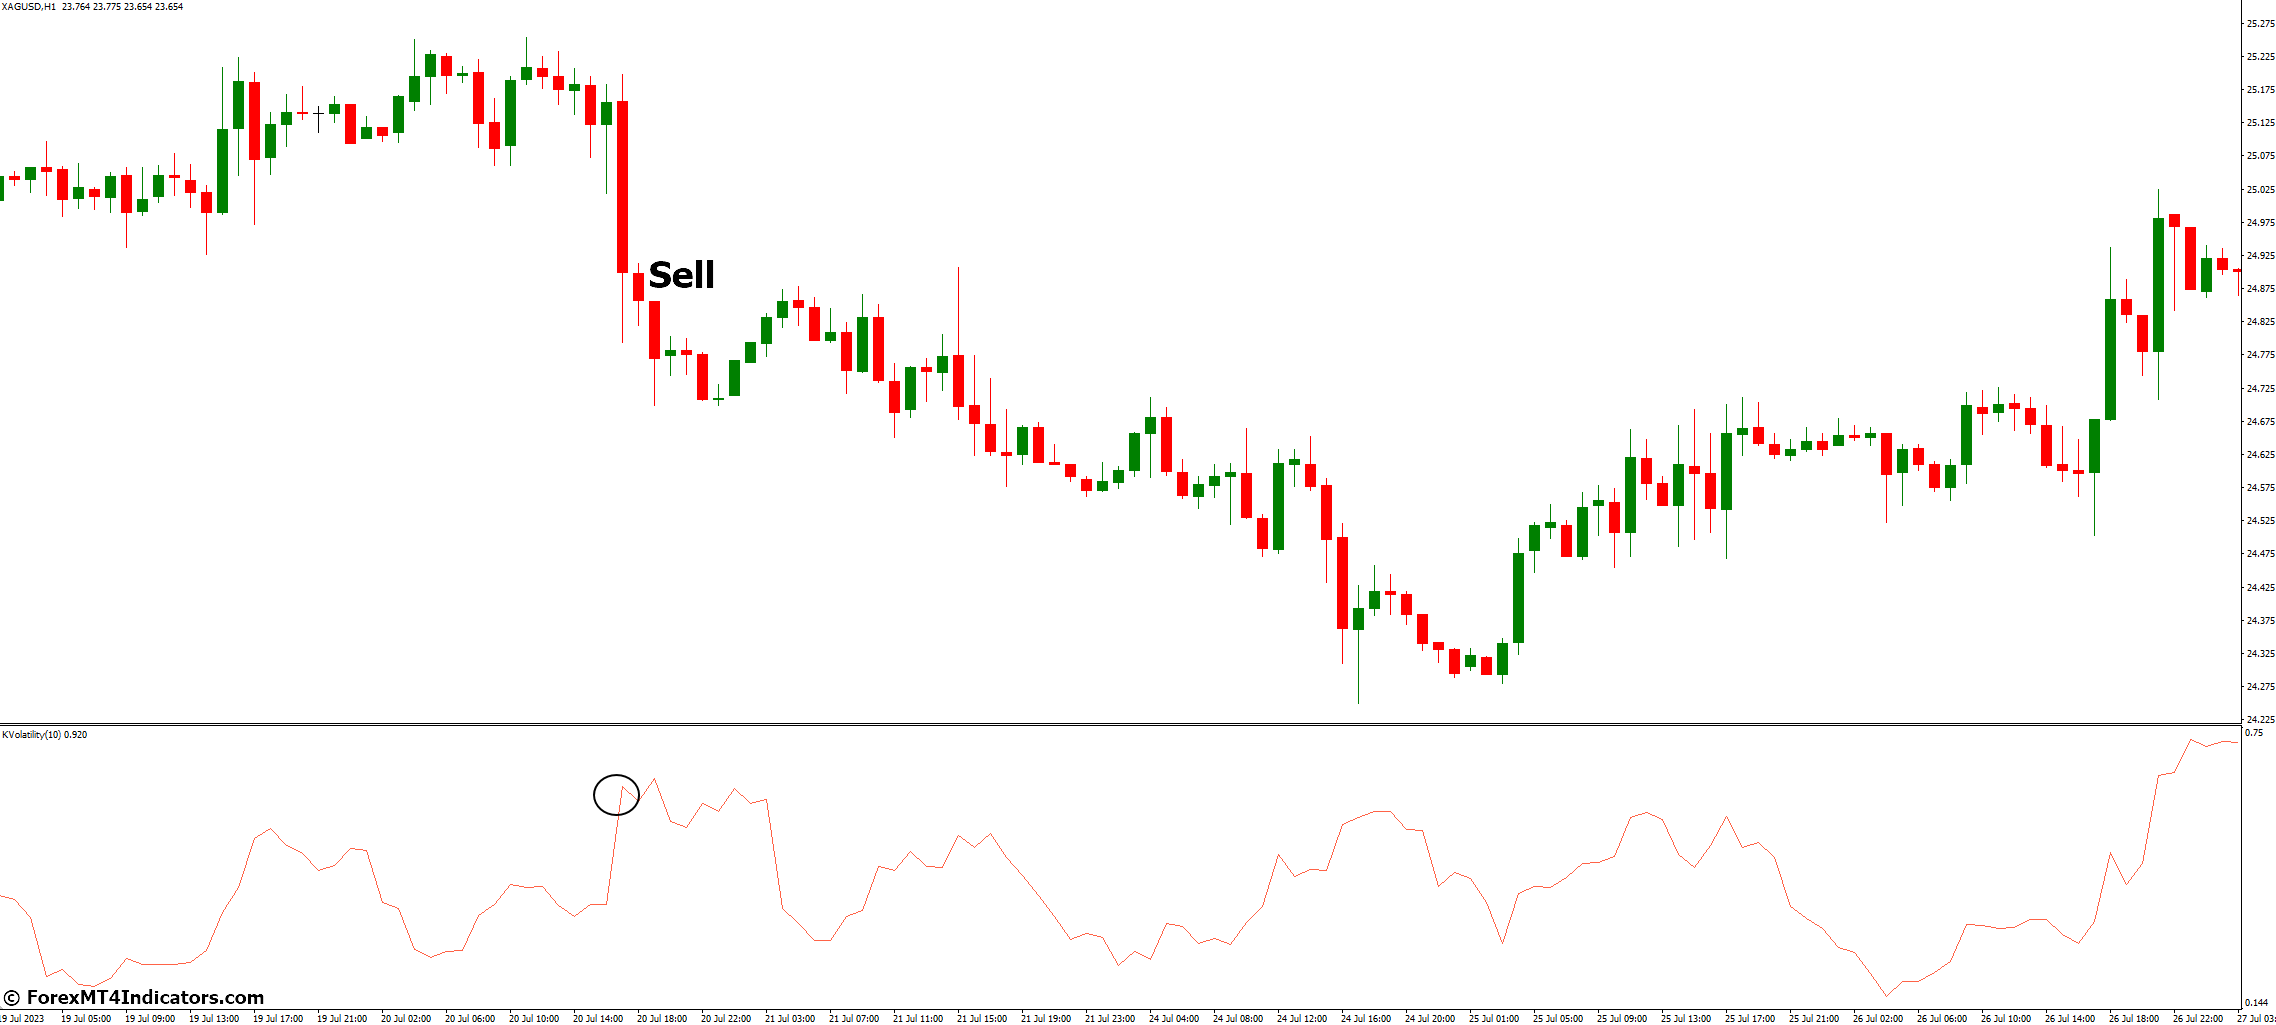 How to Trade with Kaufman Volatility Indicator MetaTrader 4 - Sell Entry